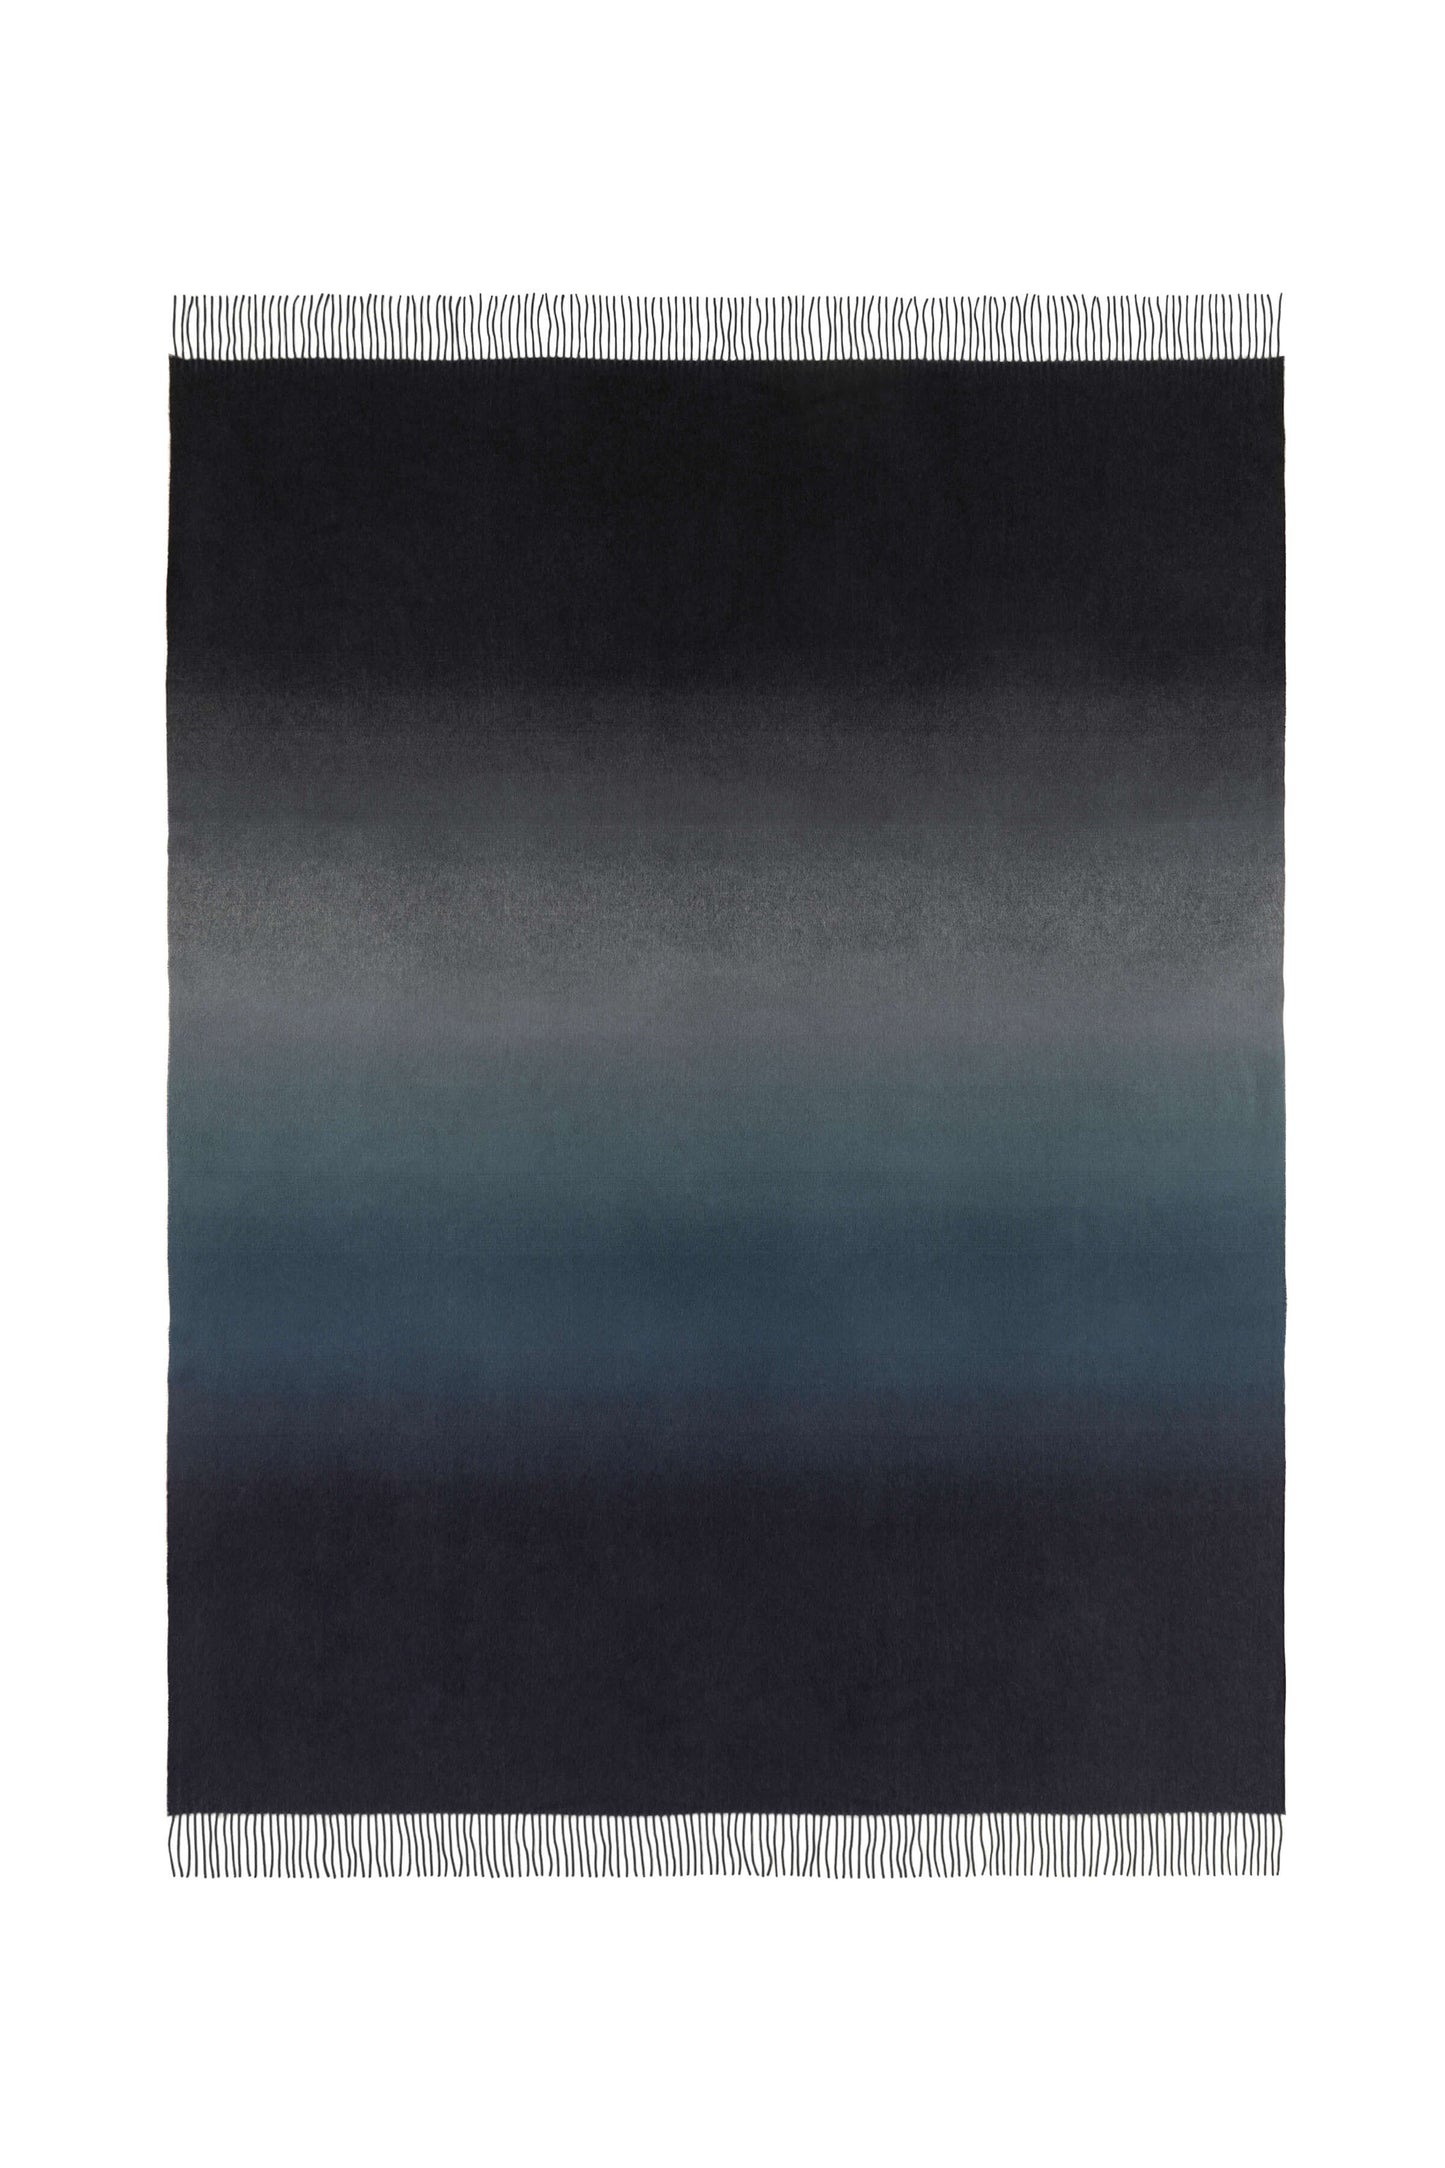 Johnstons of Elgin 2024 Blanket Collection Black & Navy Ombré Cashmere Throw WA000055RU7302ONE